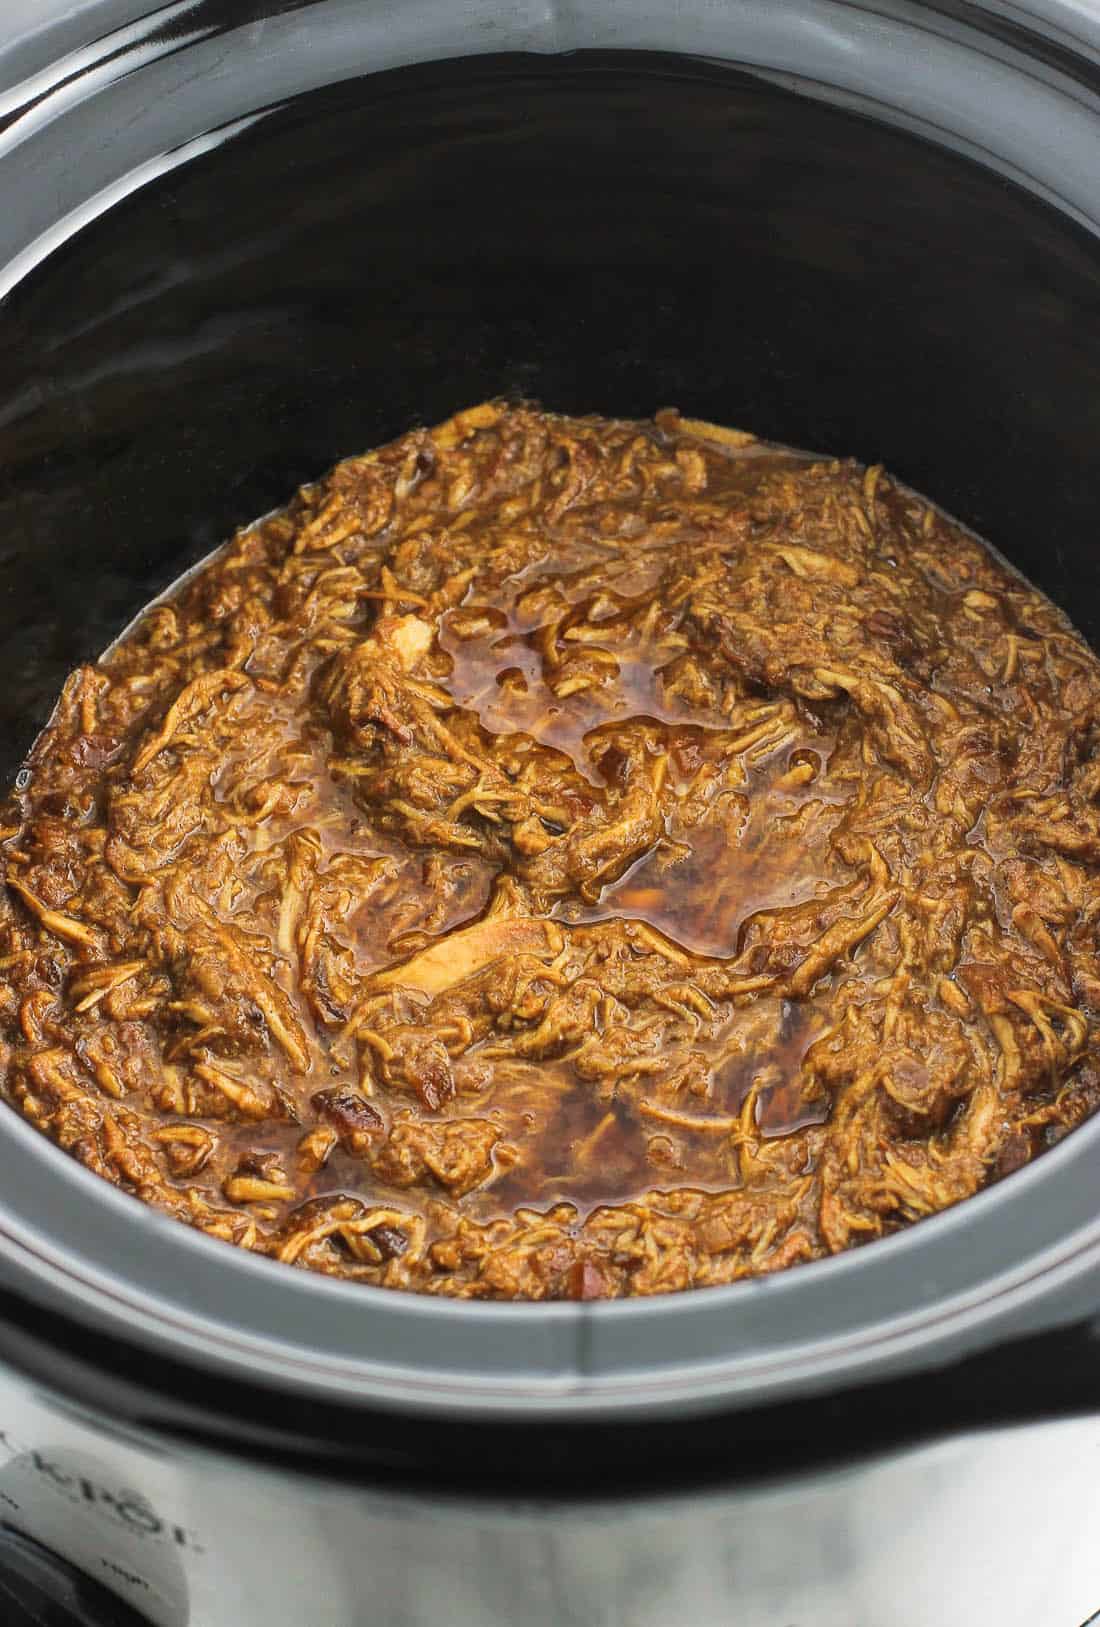 A slow cooker filled with shredded chicken and sauce.